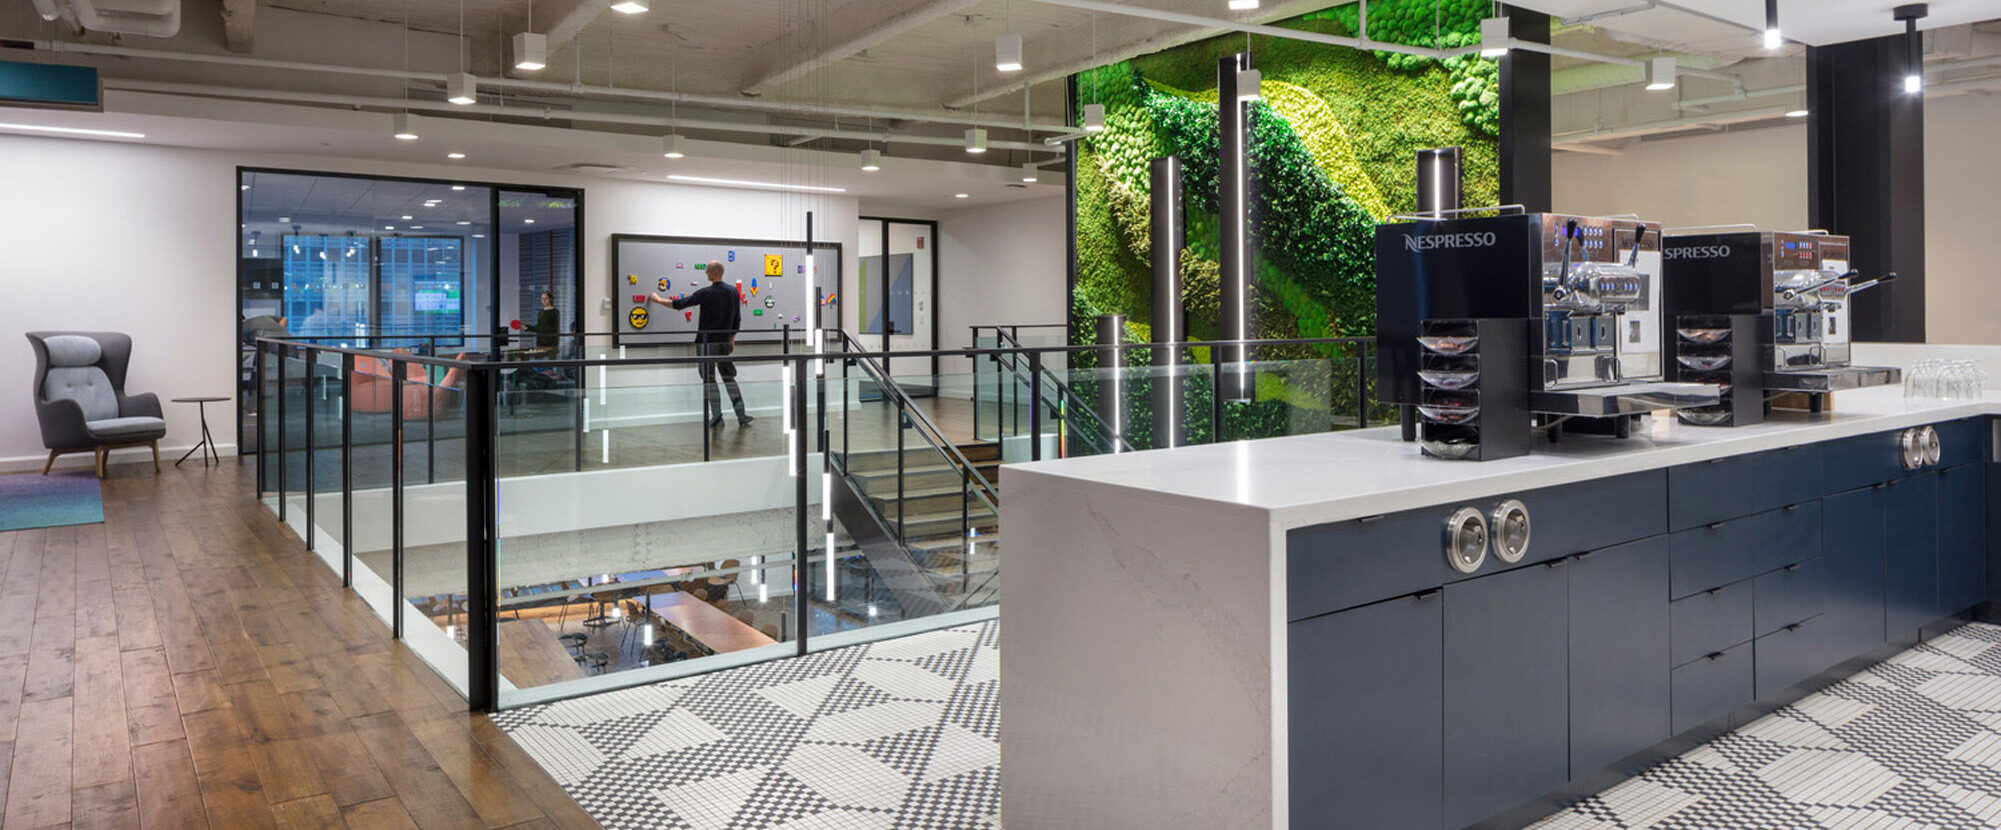 Modern open-plan office space featuring sleek geometric black and white floor tiles, with a full-height living green wall providing a focal point. Glass partitions offer transparency, and exposed beams add an industrial touch, complemented by warm lighting.